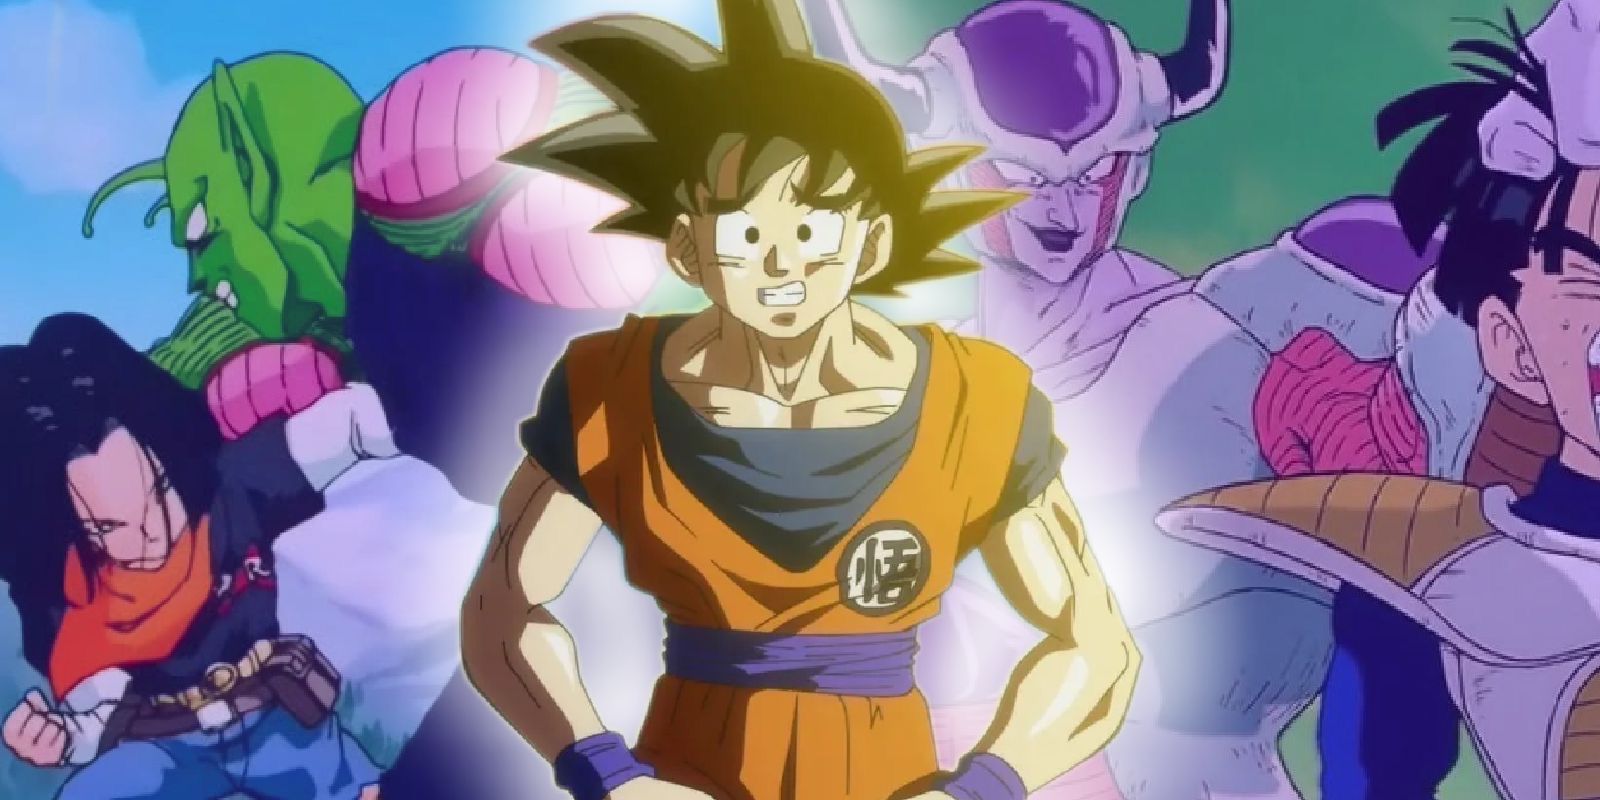 Goku looking embarrassed in front of Frieza fighting Gohan and Piccolo fighting Android 17